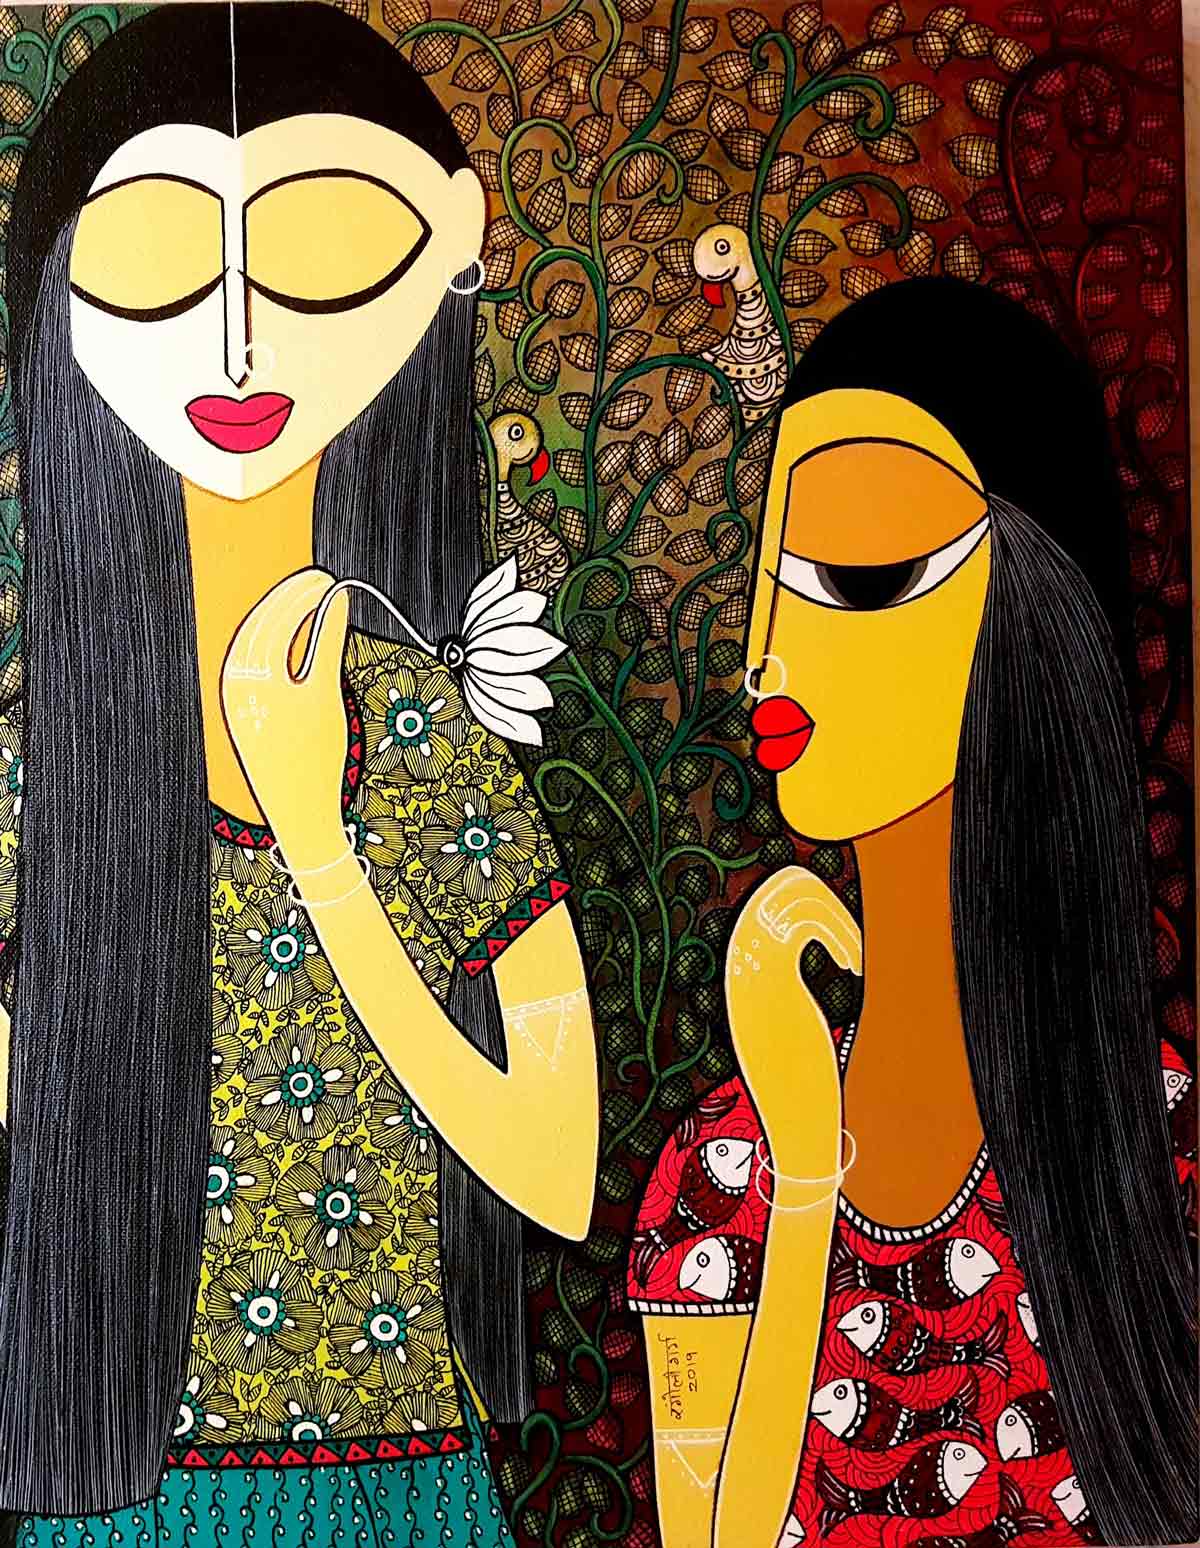 Figurative Painting with Mixed Media on Canvas "Admiration" art by Rangoli Garg